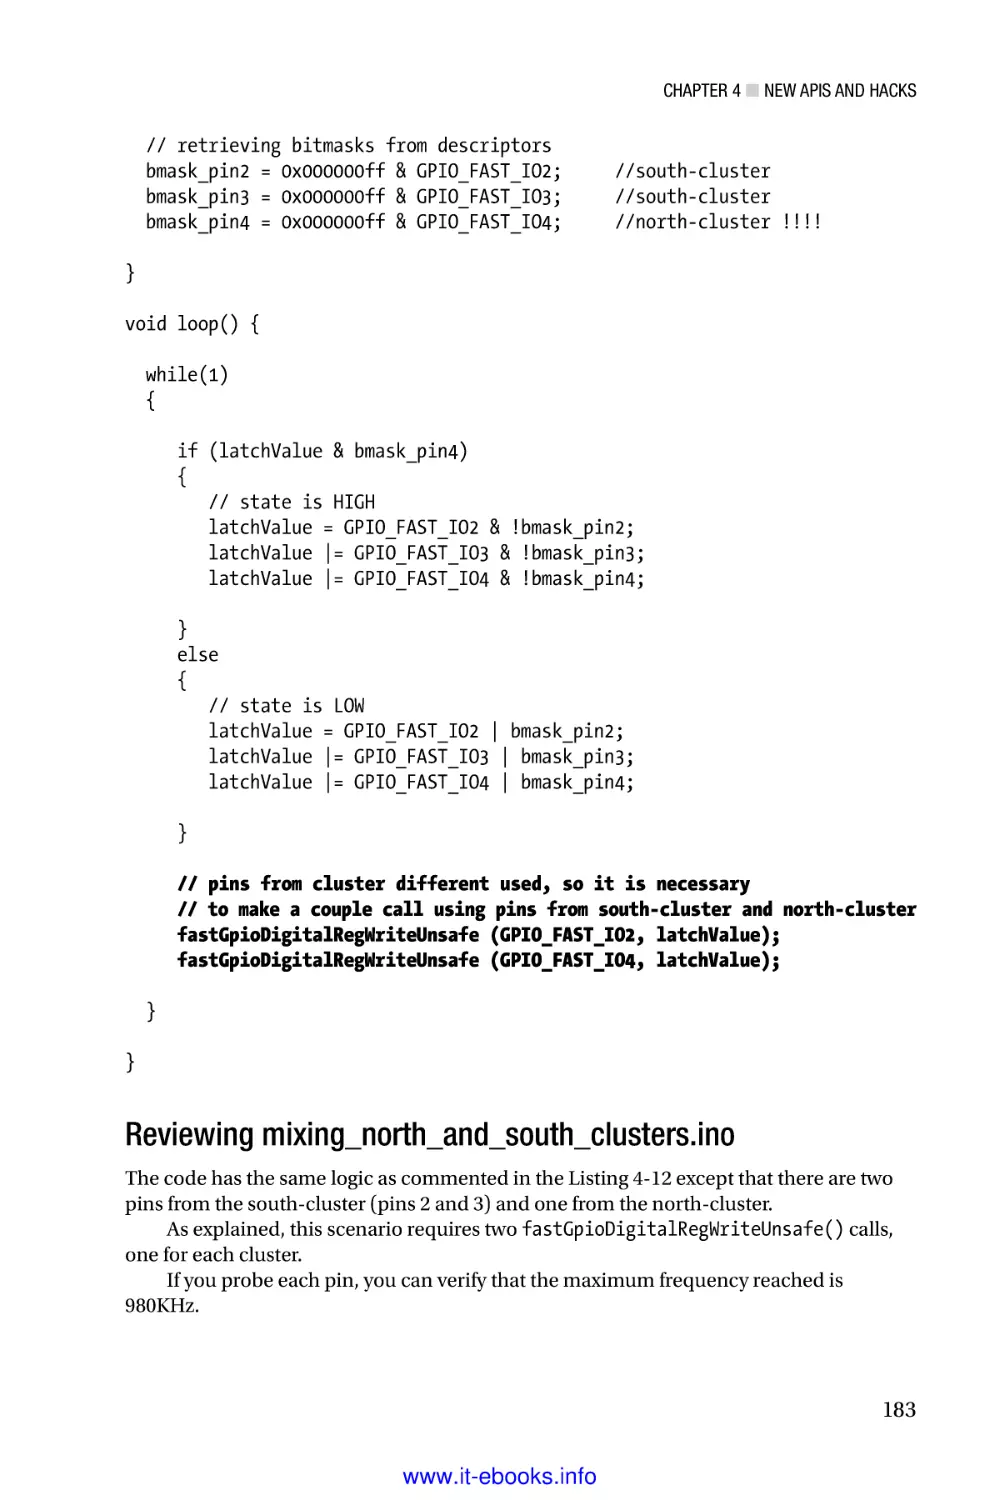 Reviewing mixing_north_and_south_clusters.ino